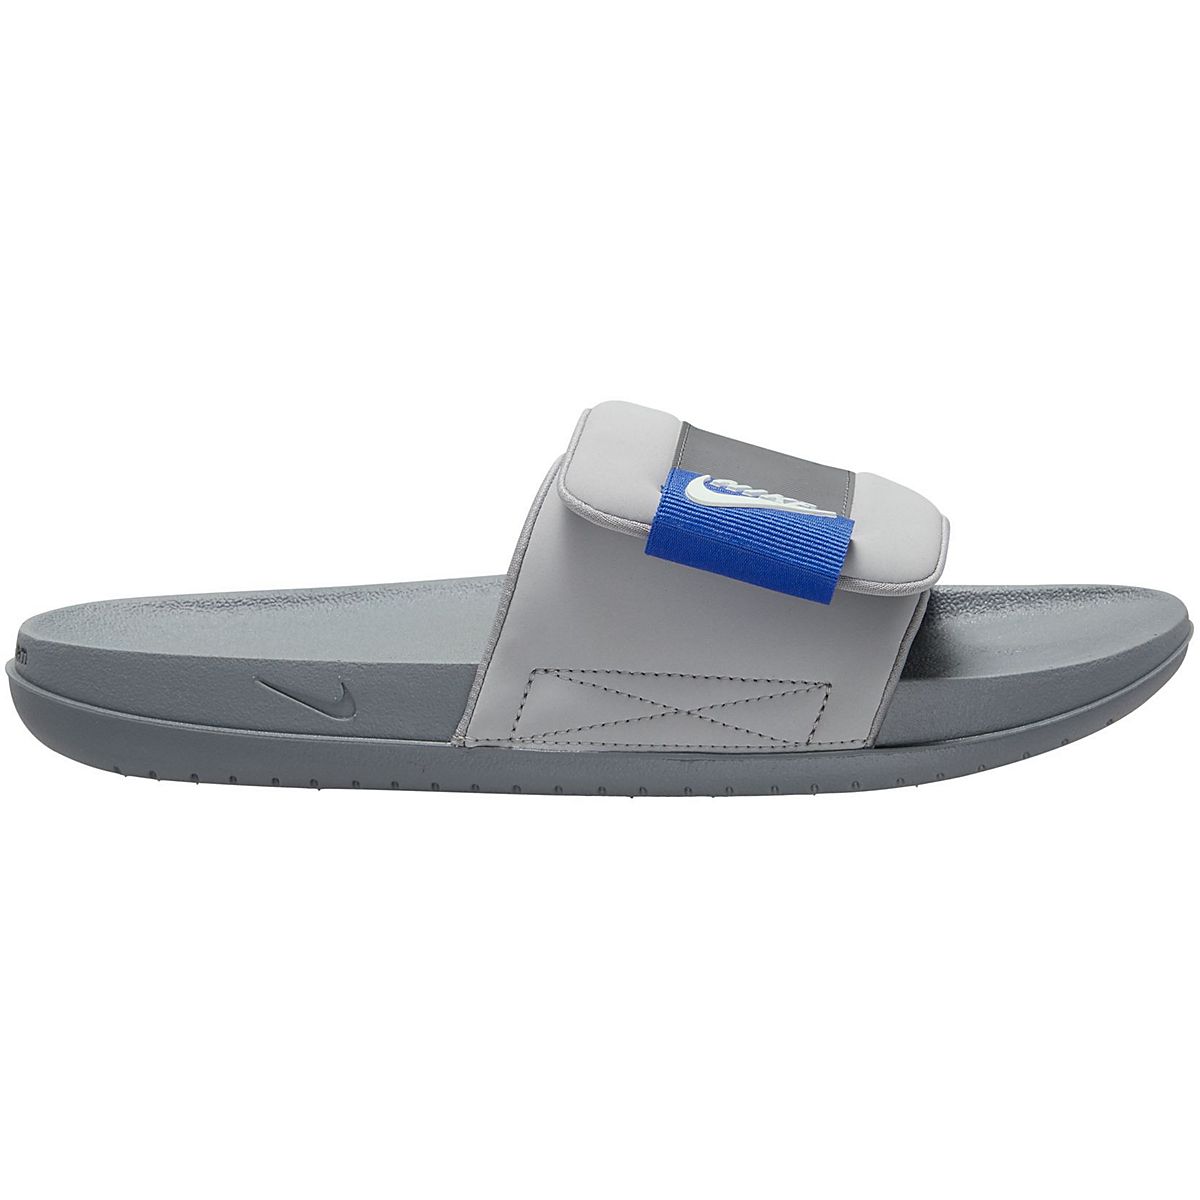 Nike Men's Offcourt Adjust Slide Shoes | Free Shipping at Academy